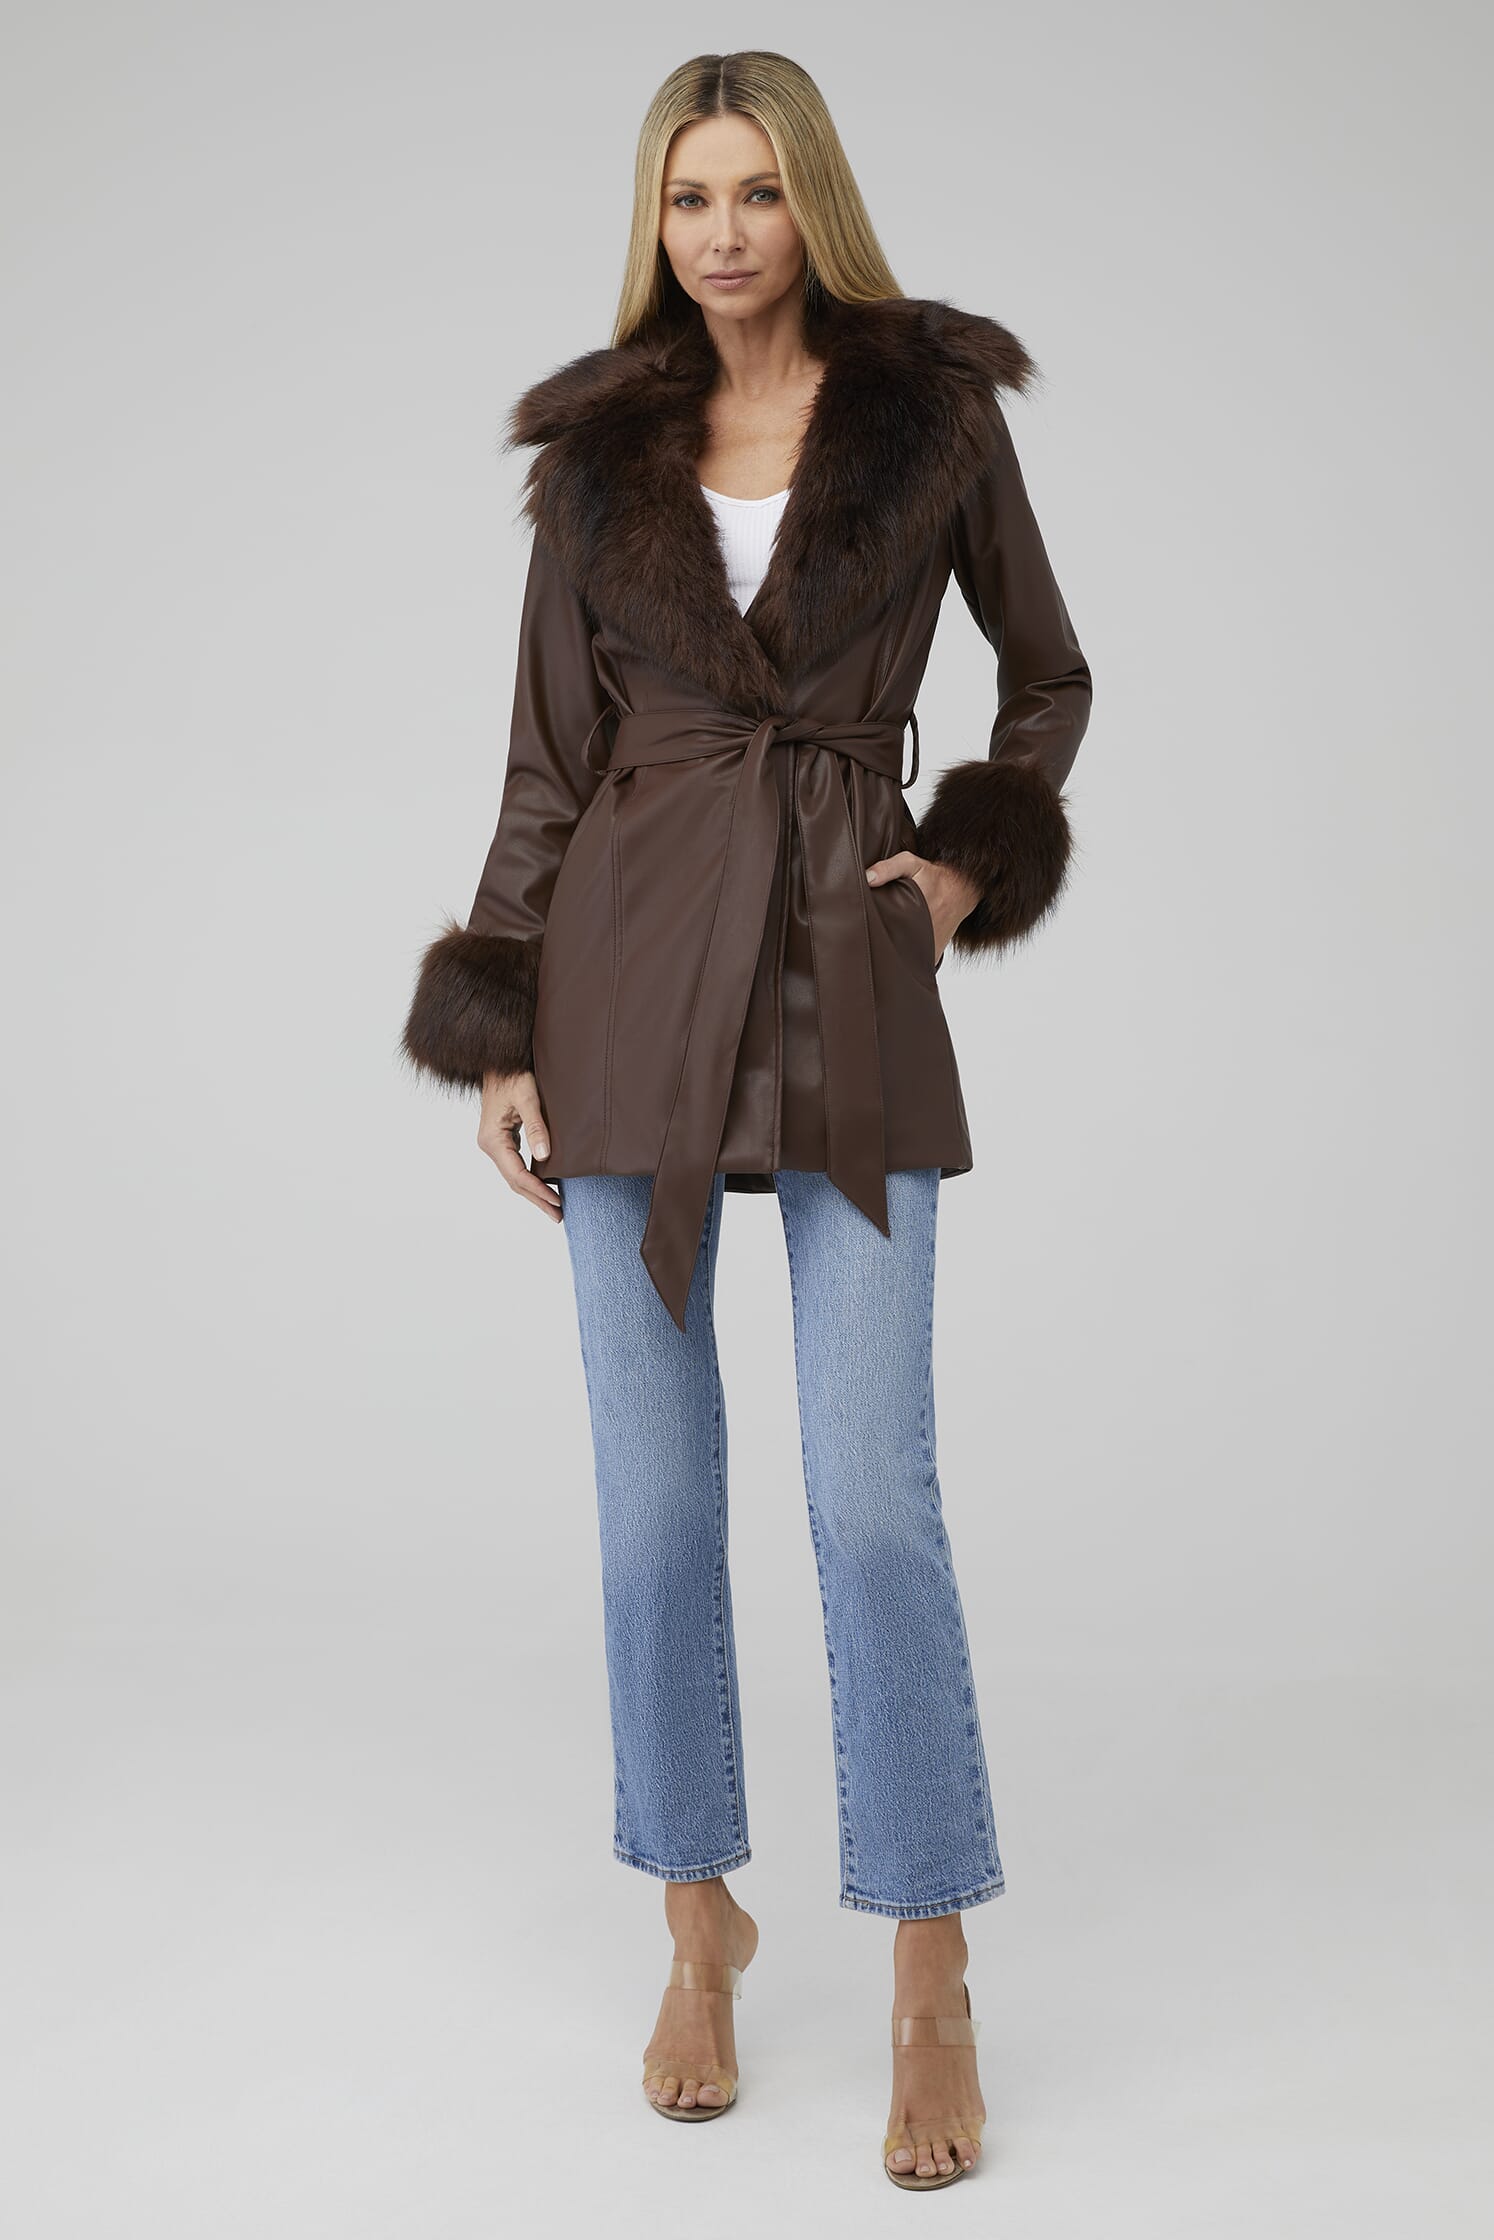 Show Me Your Mumu | Penny Lane Coat in Cocoa Faux Leather | FashionPass